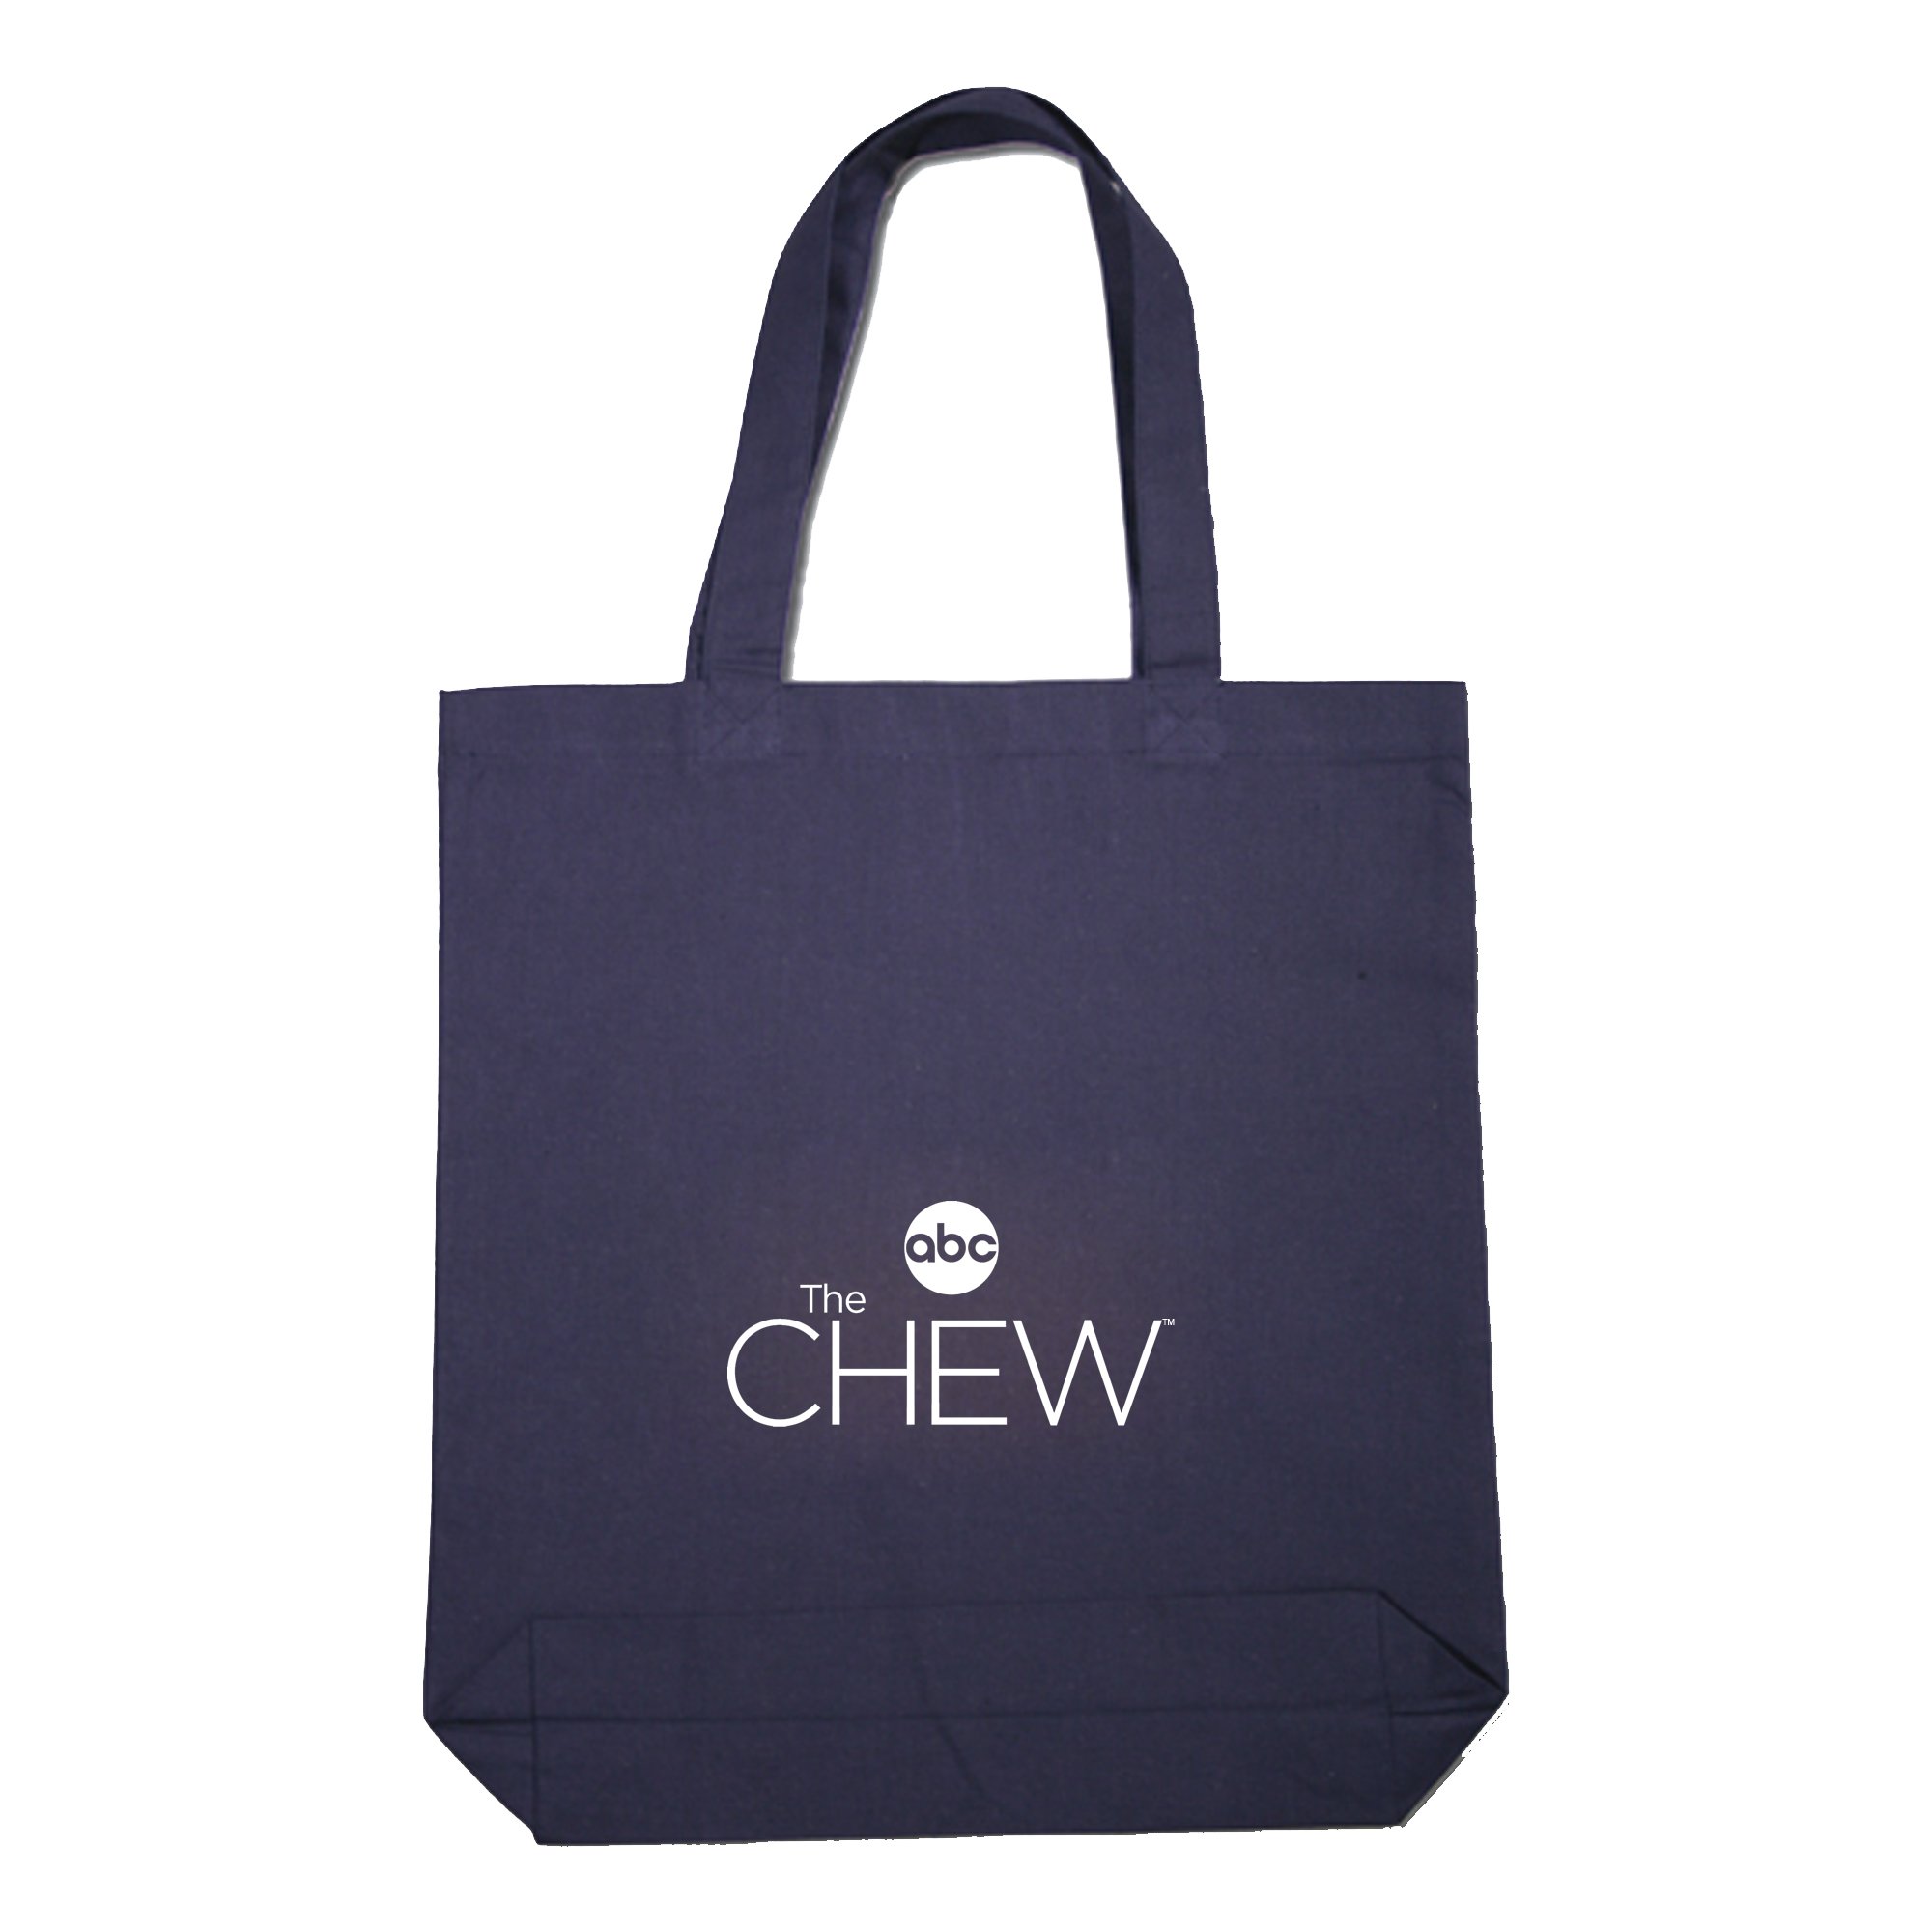 Promotional Gusseted Canvas Economical Tote Bag - 6 oz ...